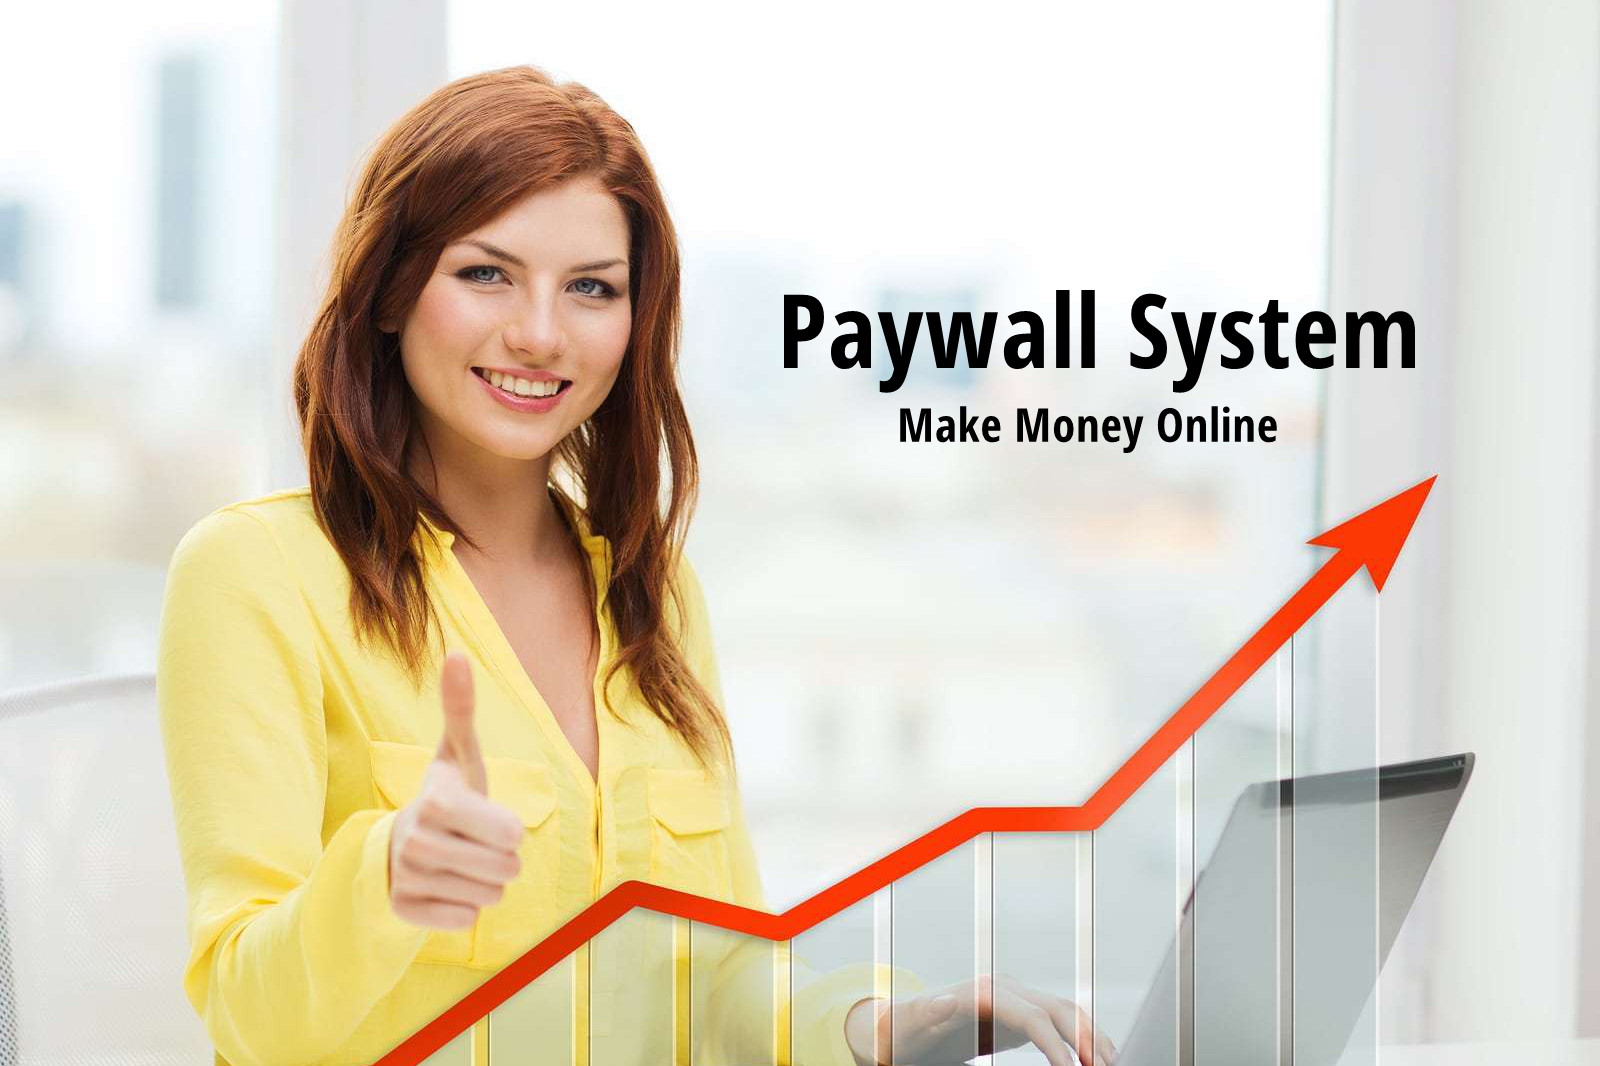 Paywall system to make money